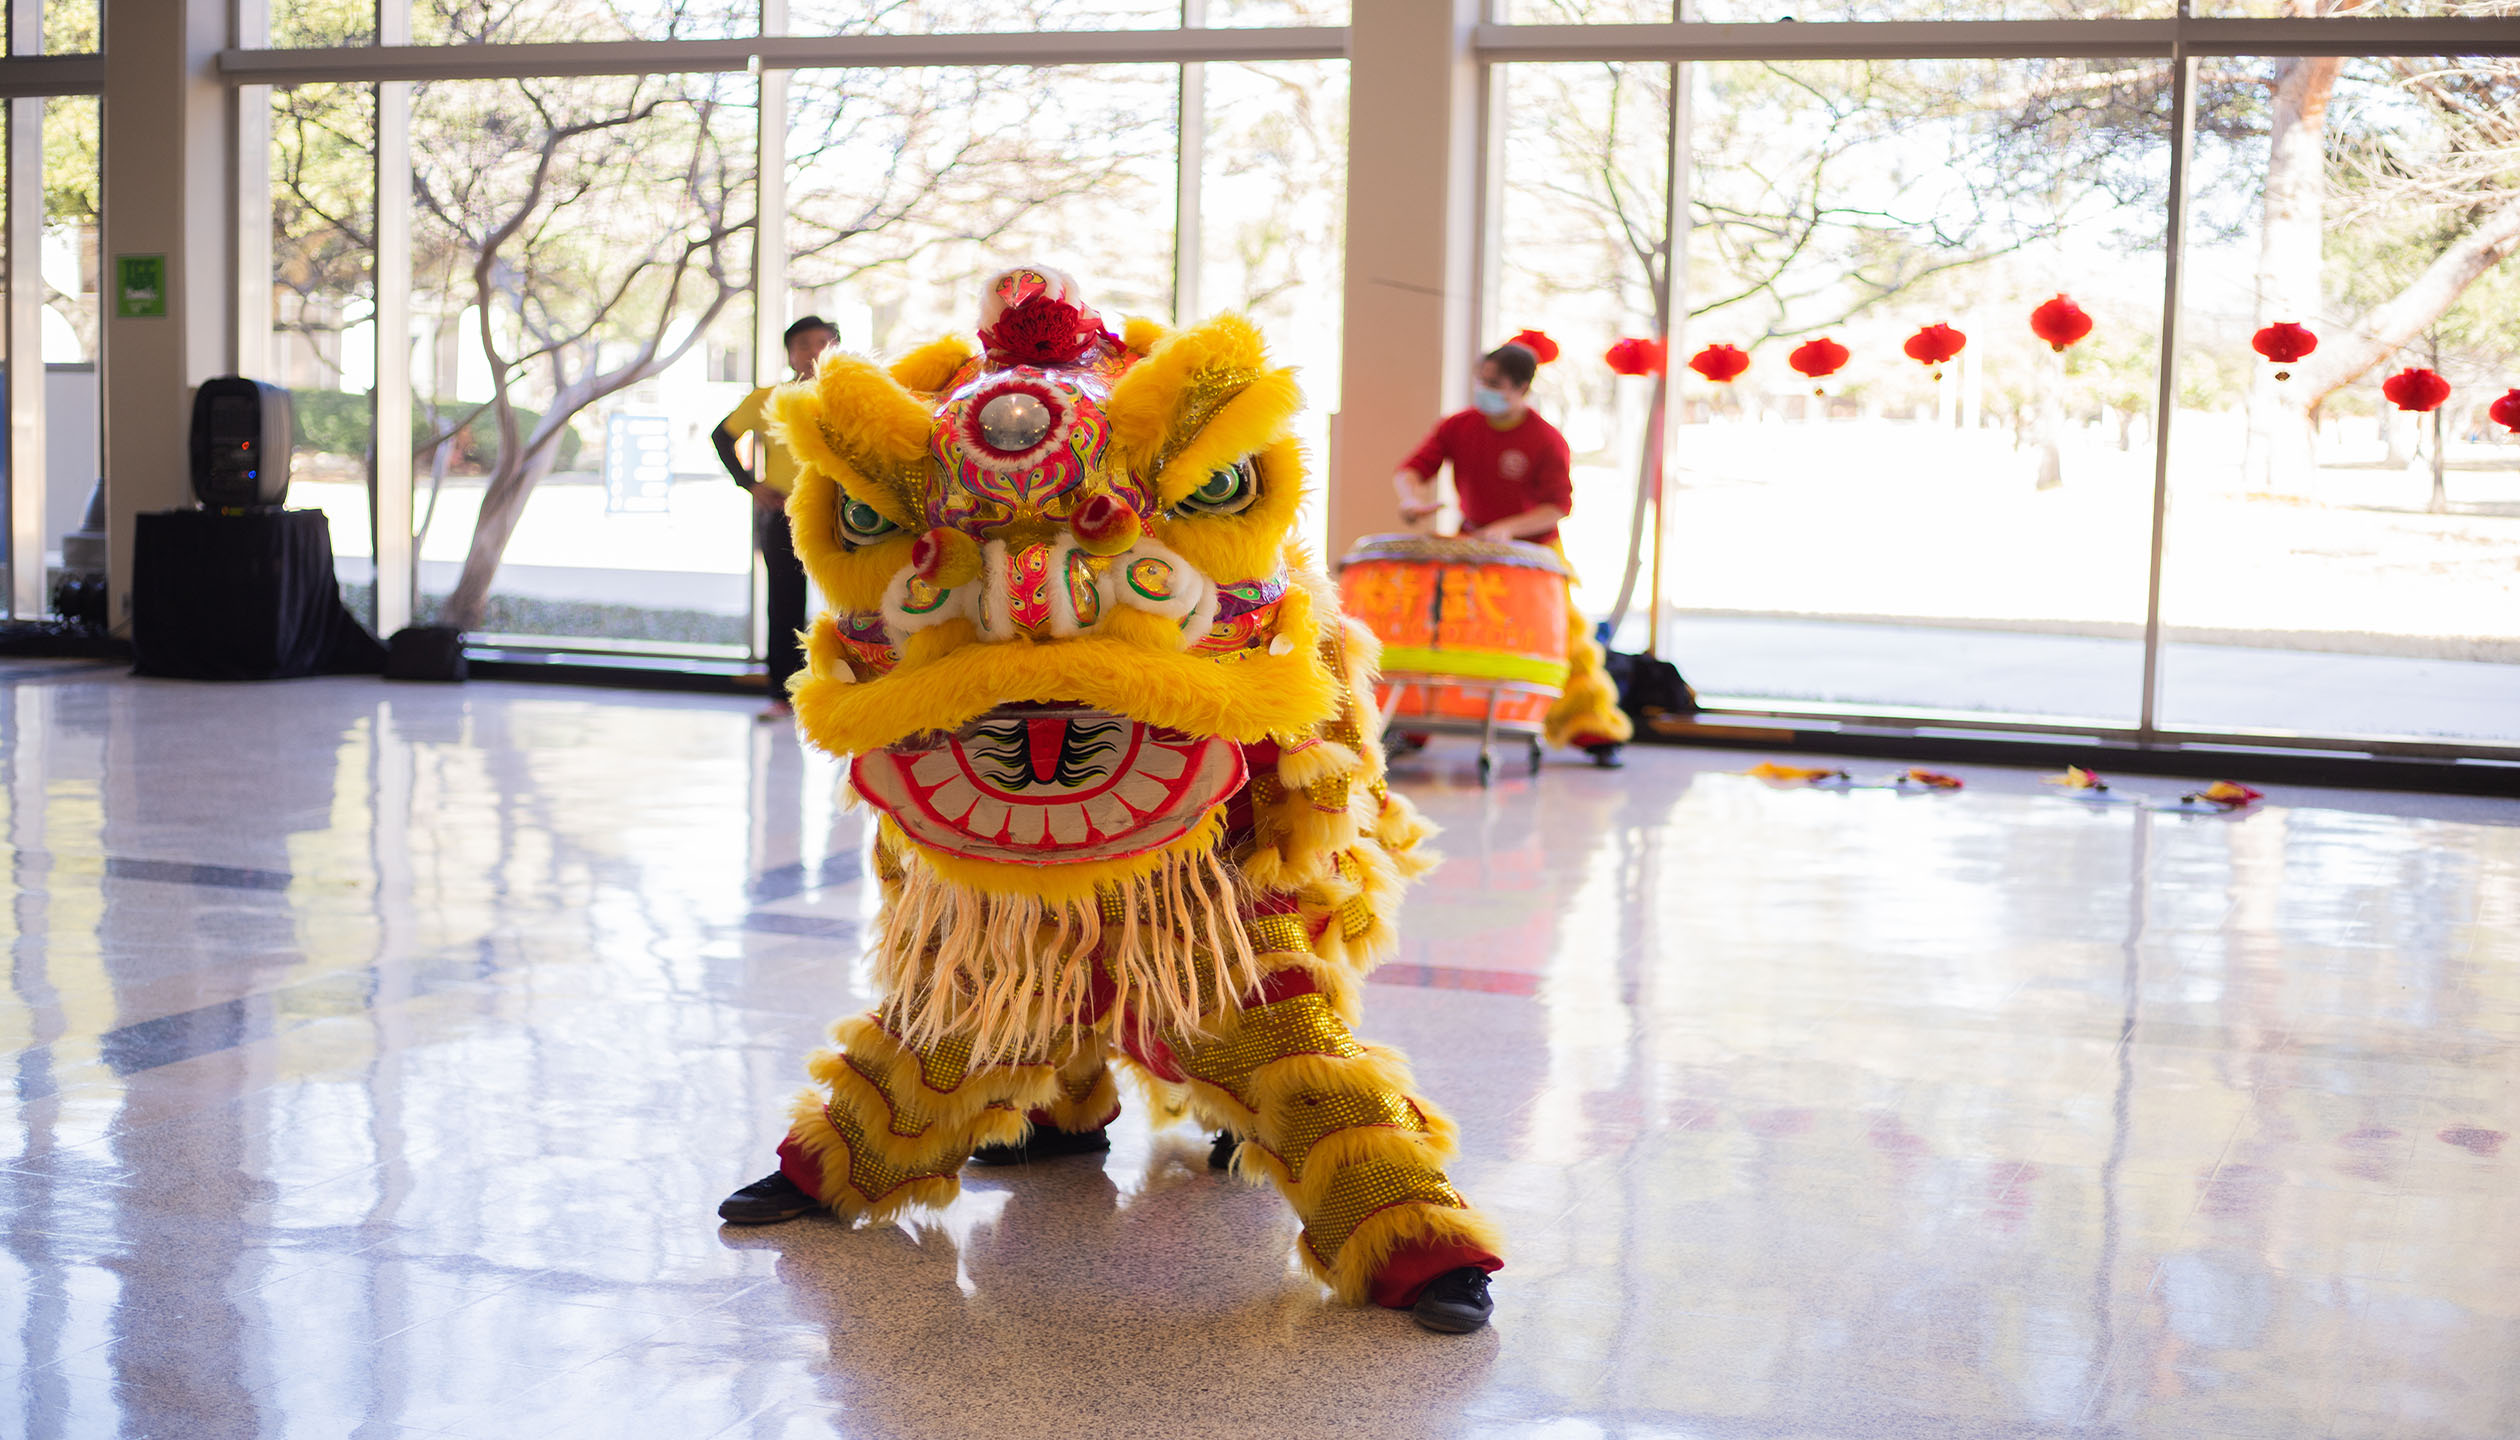 A traditional lion costume piloted by members of the J.K. Wong Kung Fu Tai Chi Academy parades through the halls of South Campus during its Lunar New Year event. Joel Solis/The Collegian